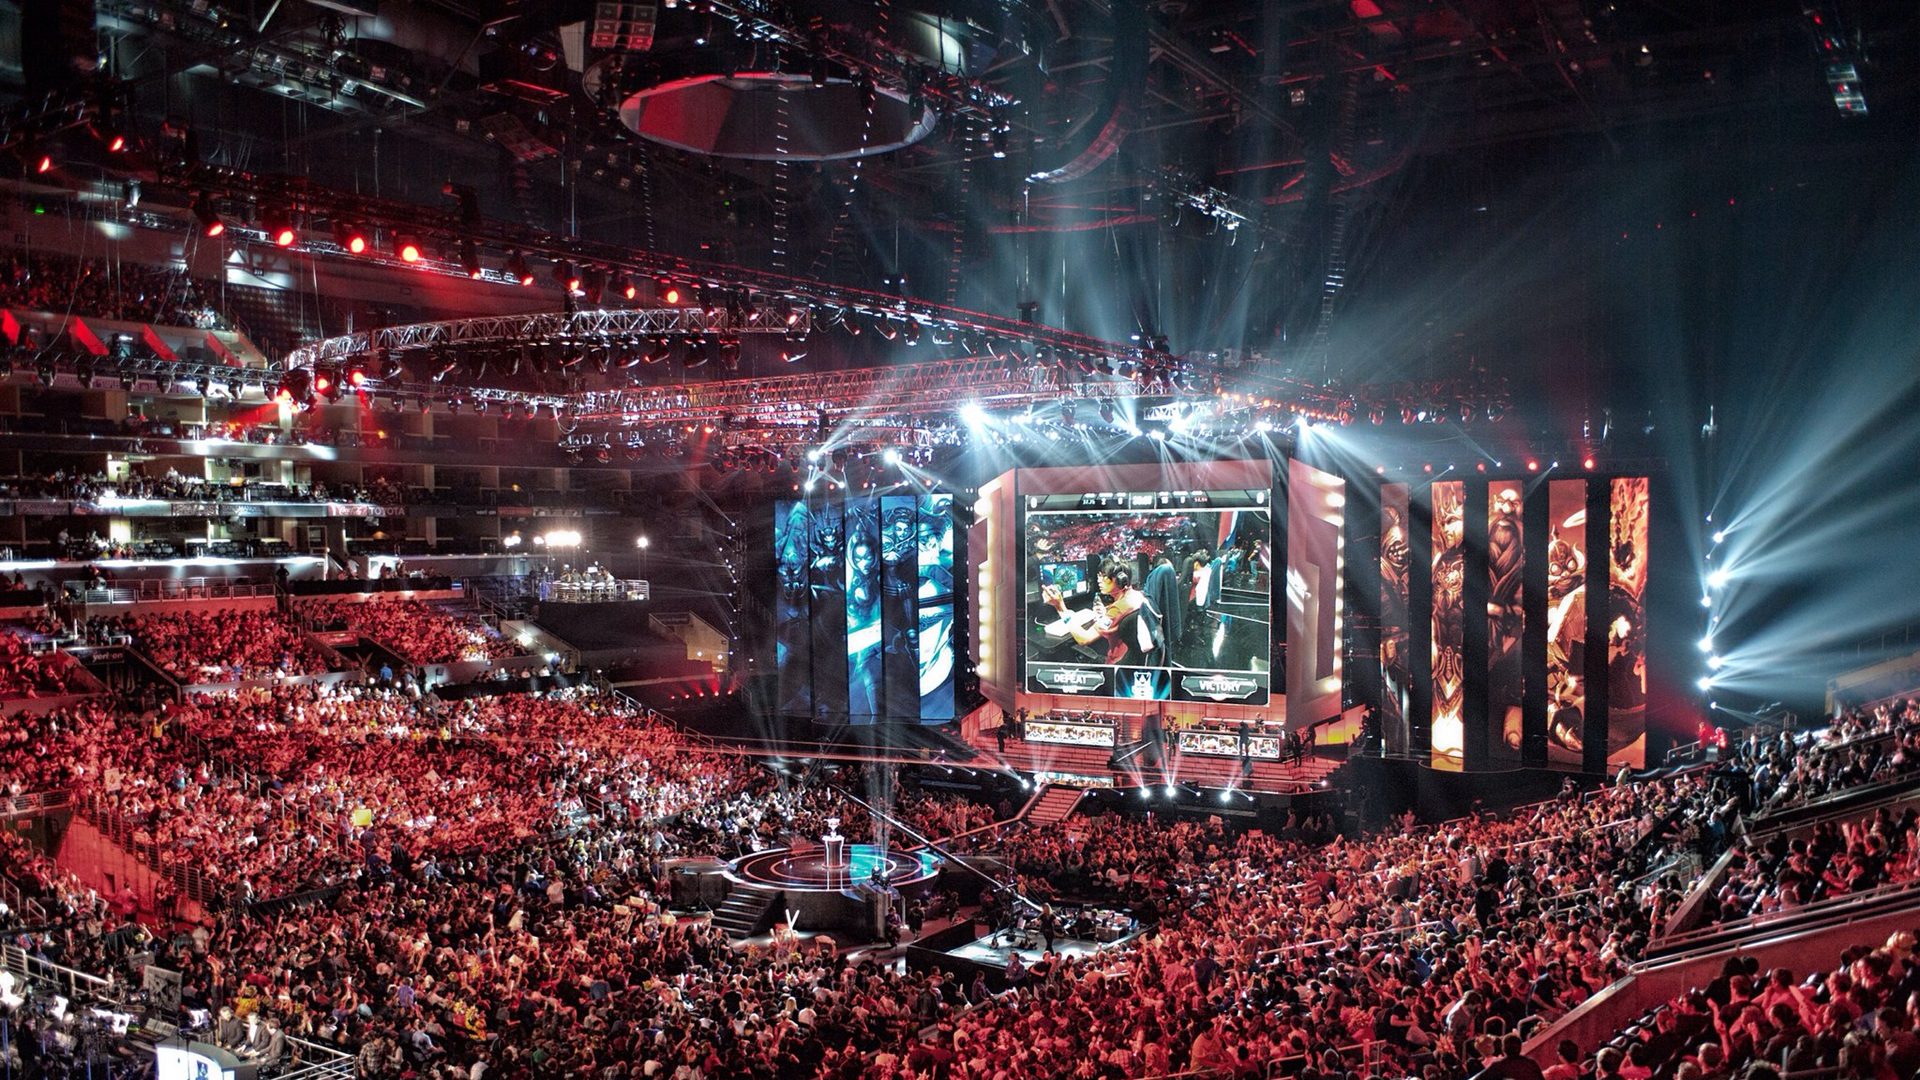 The 2013 League of Legends World Championship peaked at 8.5 million concurrent viewers.